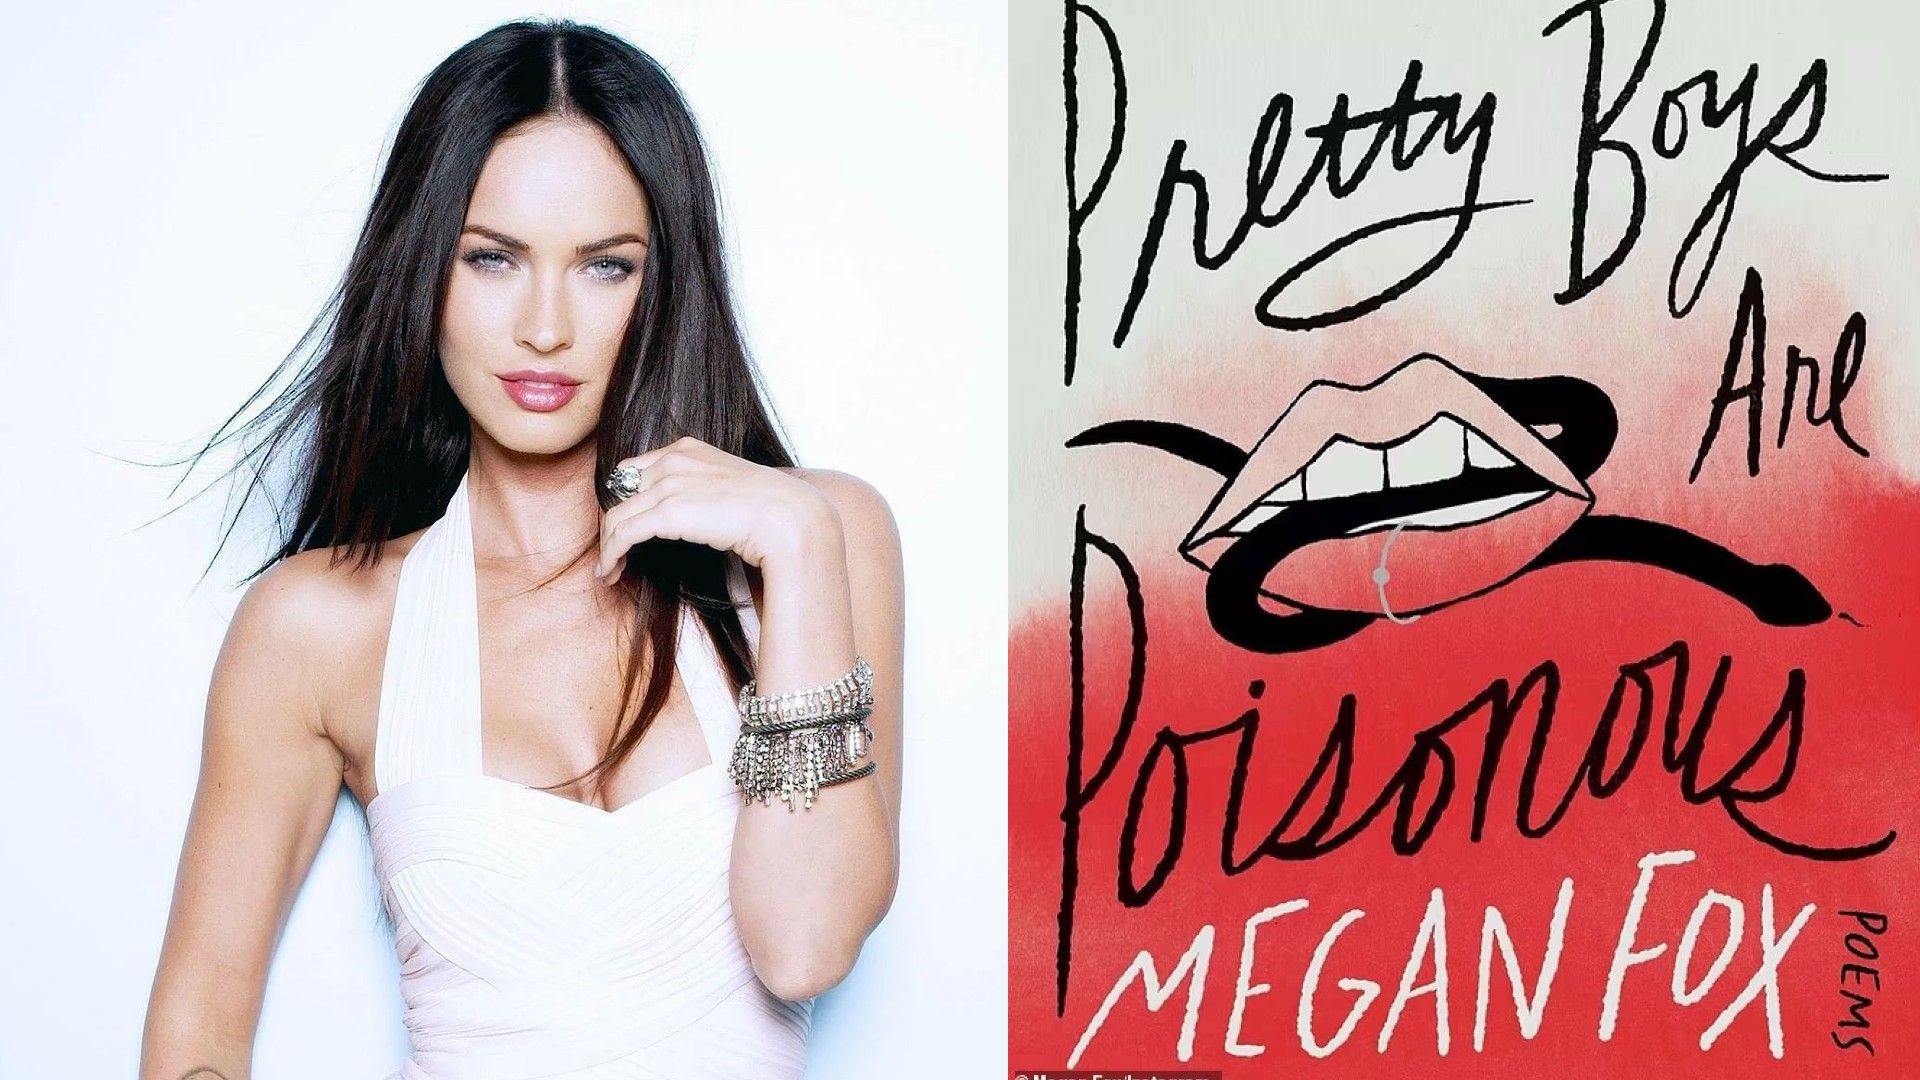 Megan Fox released a book of poems